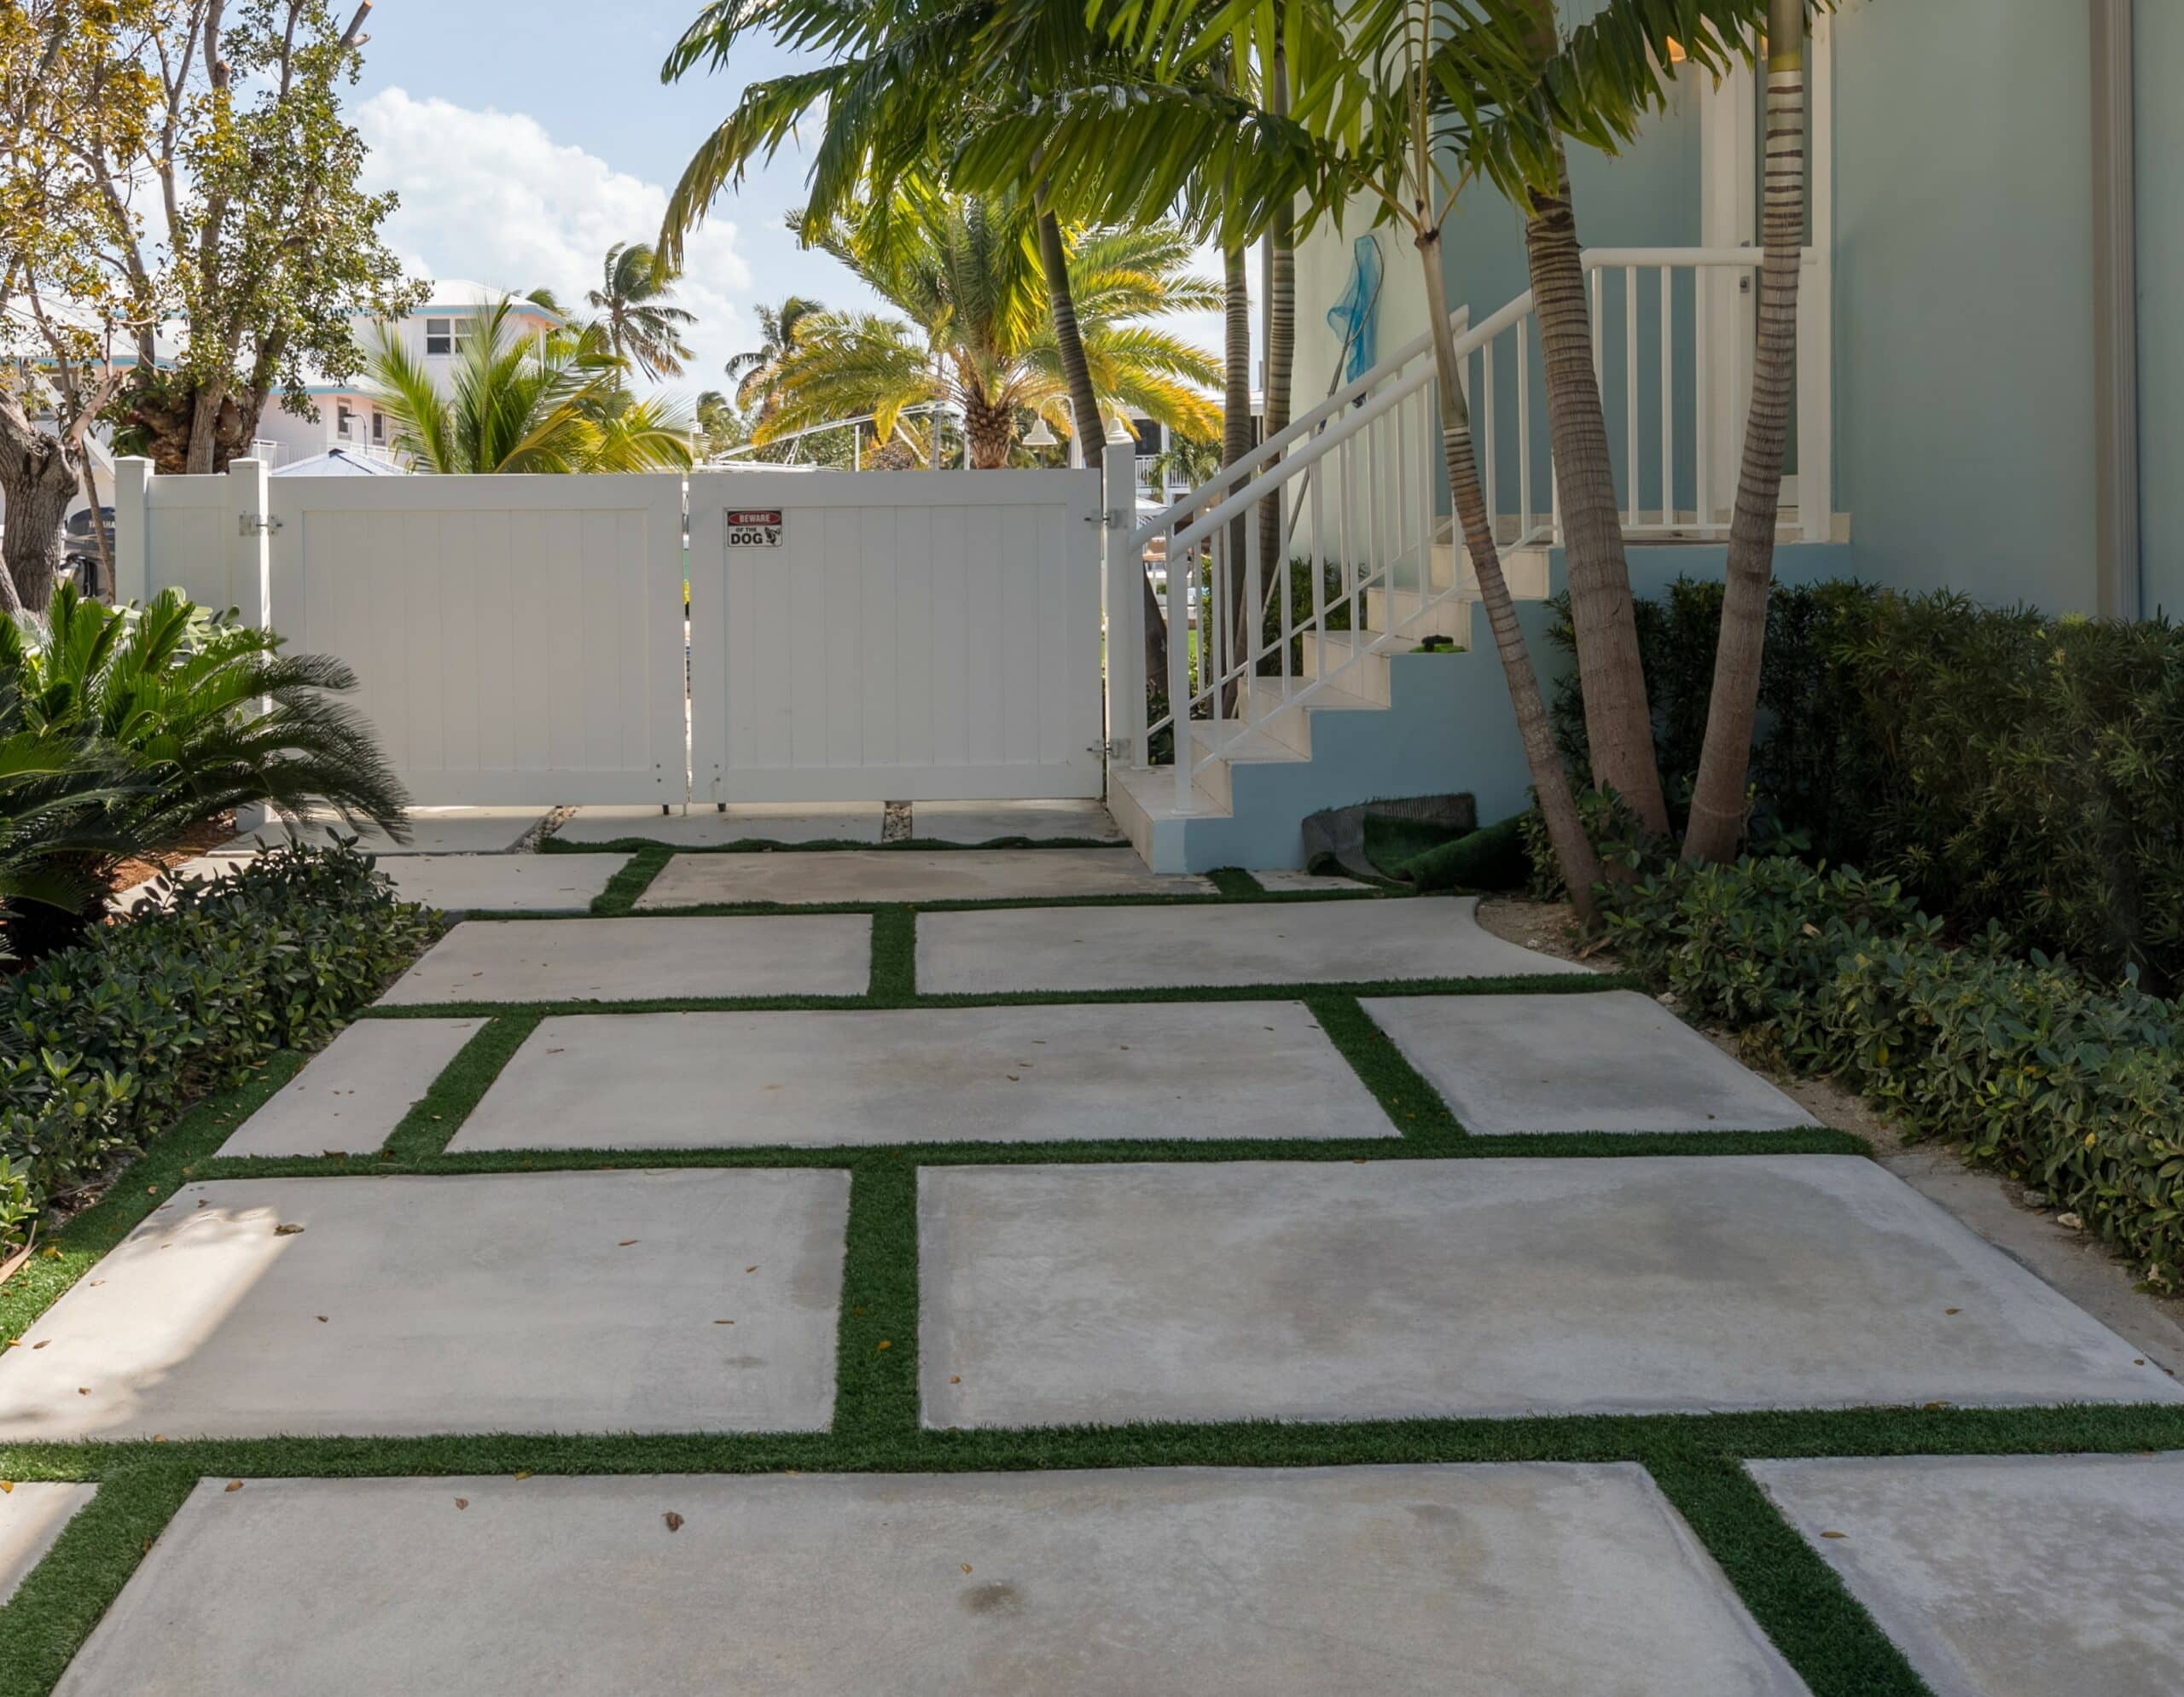 Modern Concrete slabs separated by grass in driveway with white